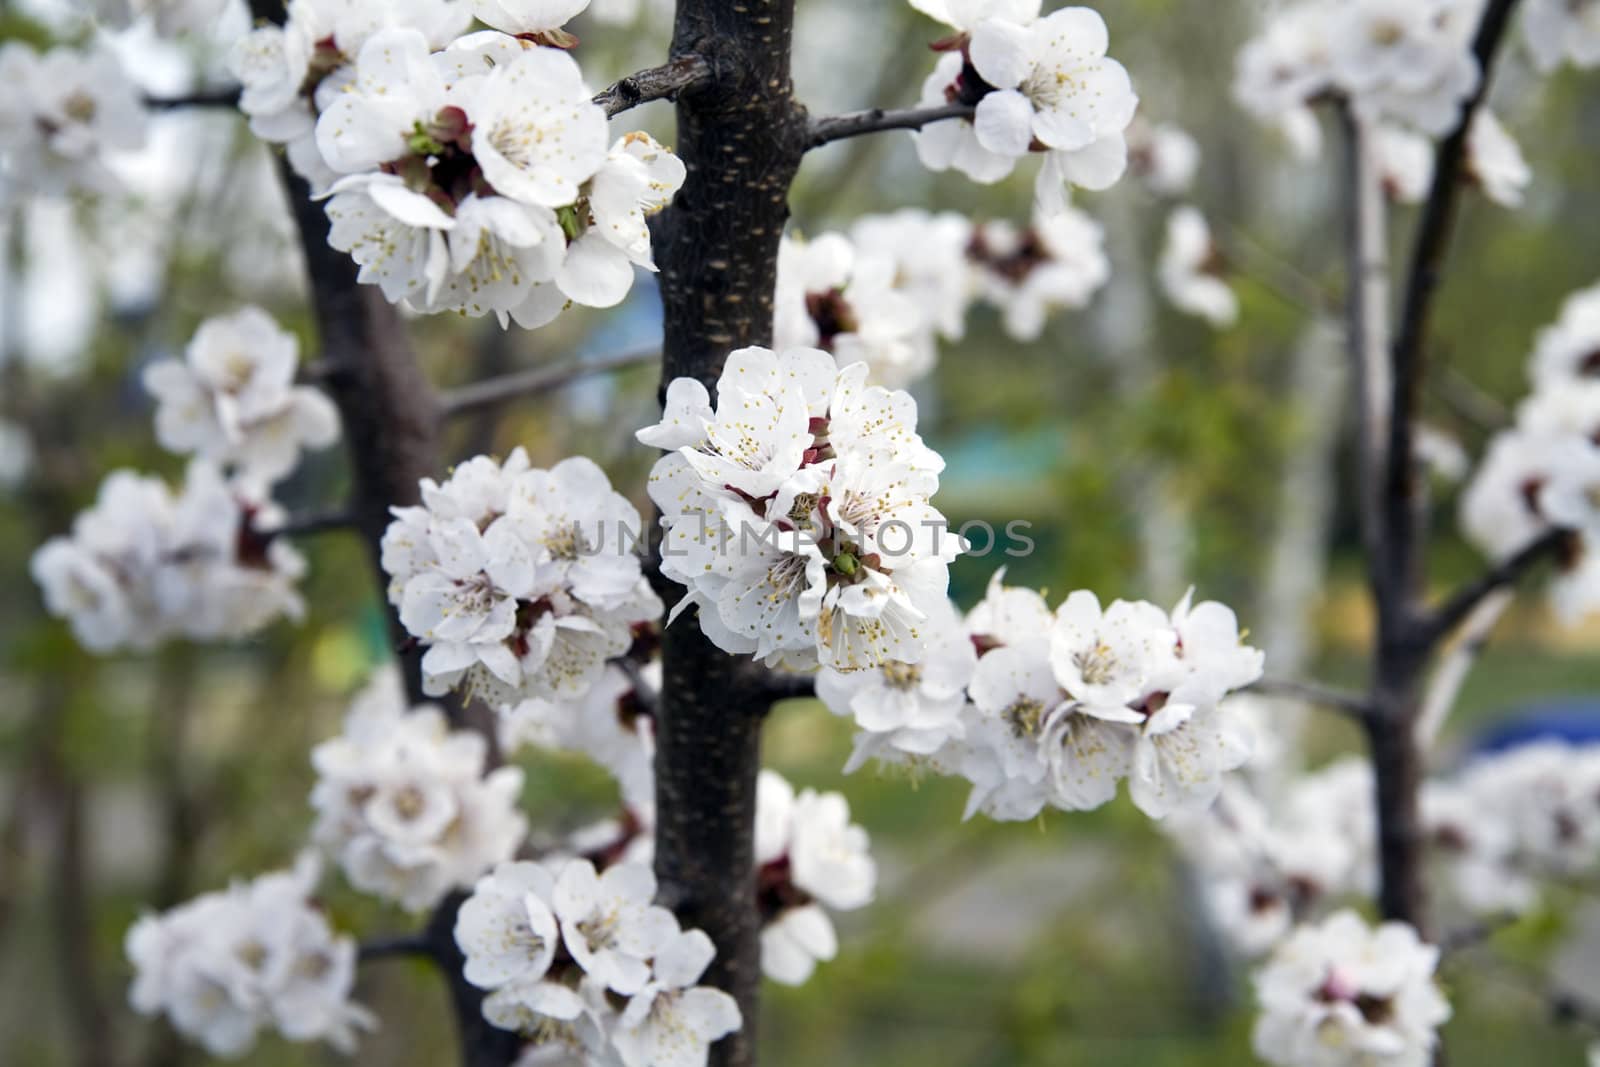 flowering branch of tree is in spring on a blurred background